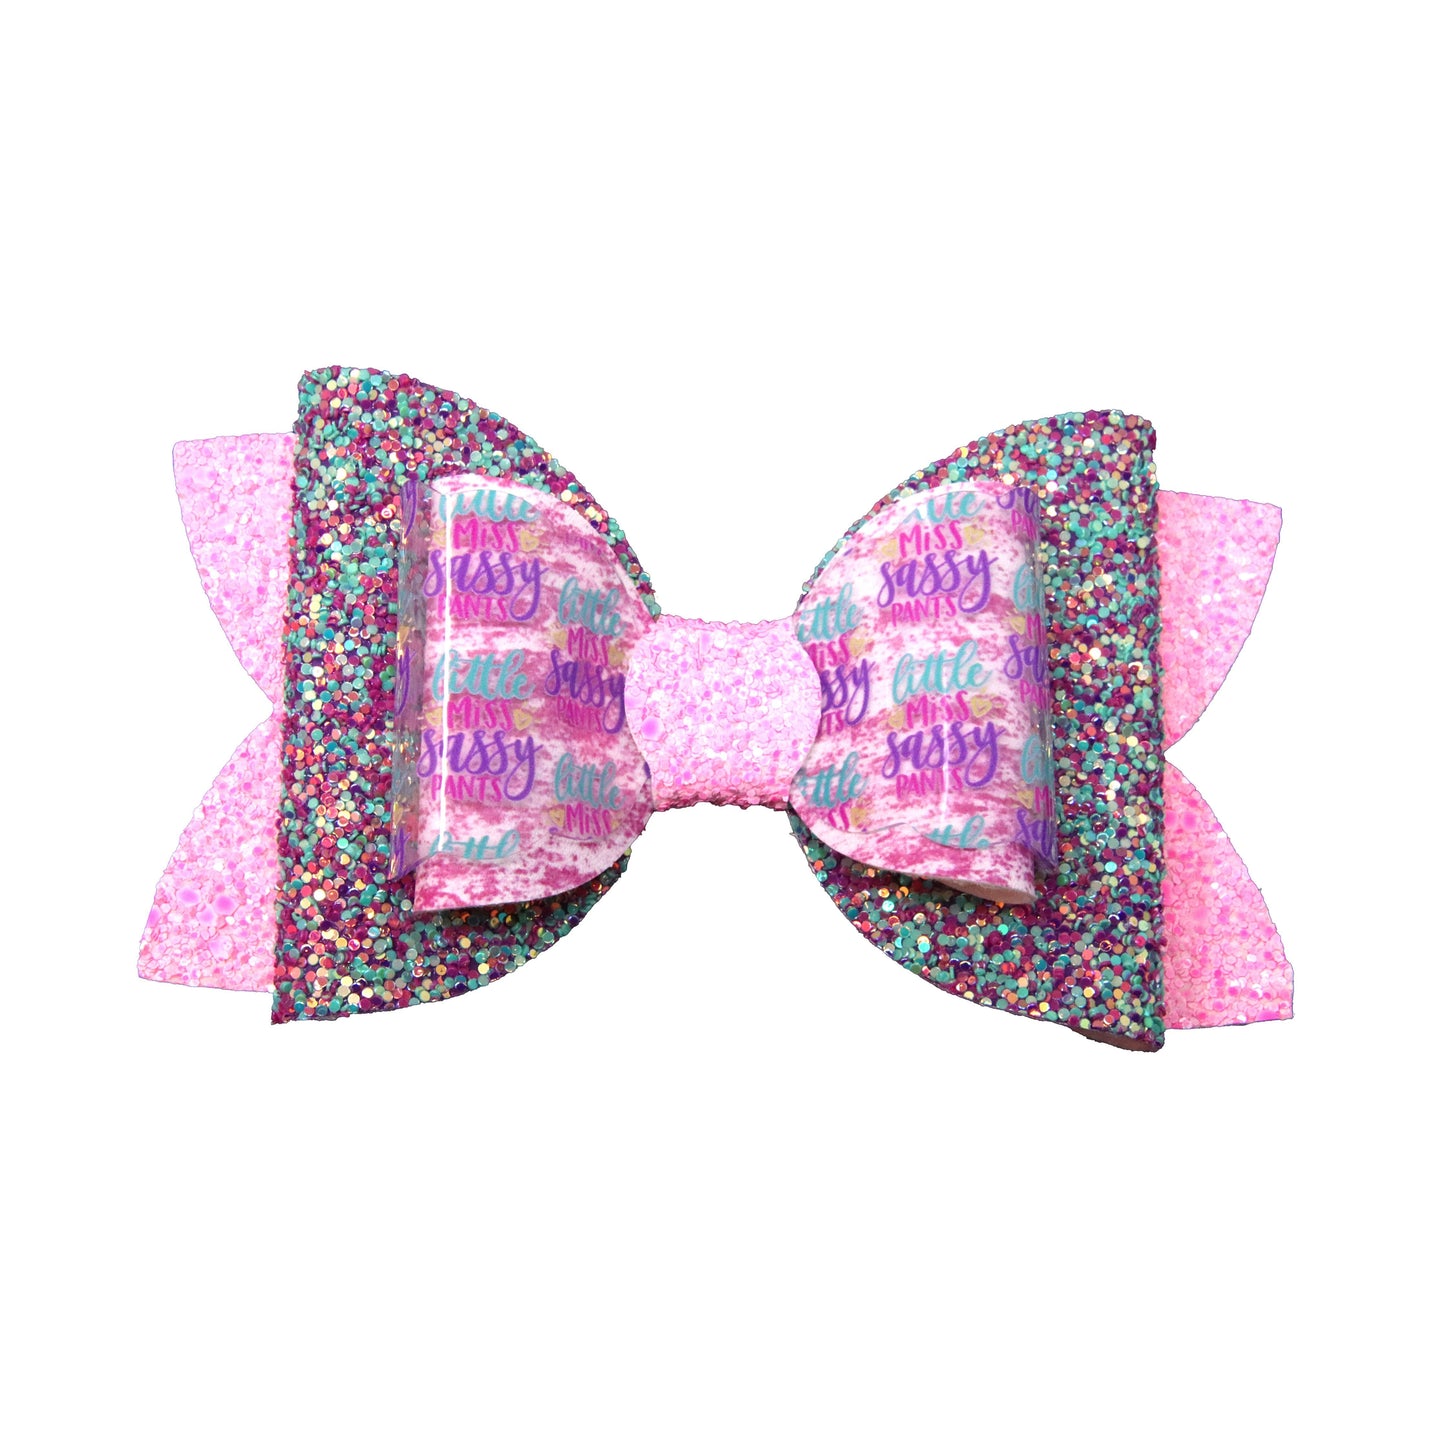 Little Miss Sassy Pants Dressed-up Double Diva Bow 5"